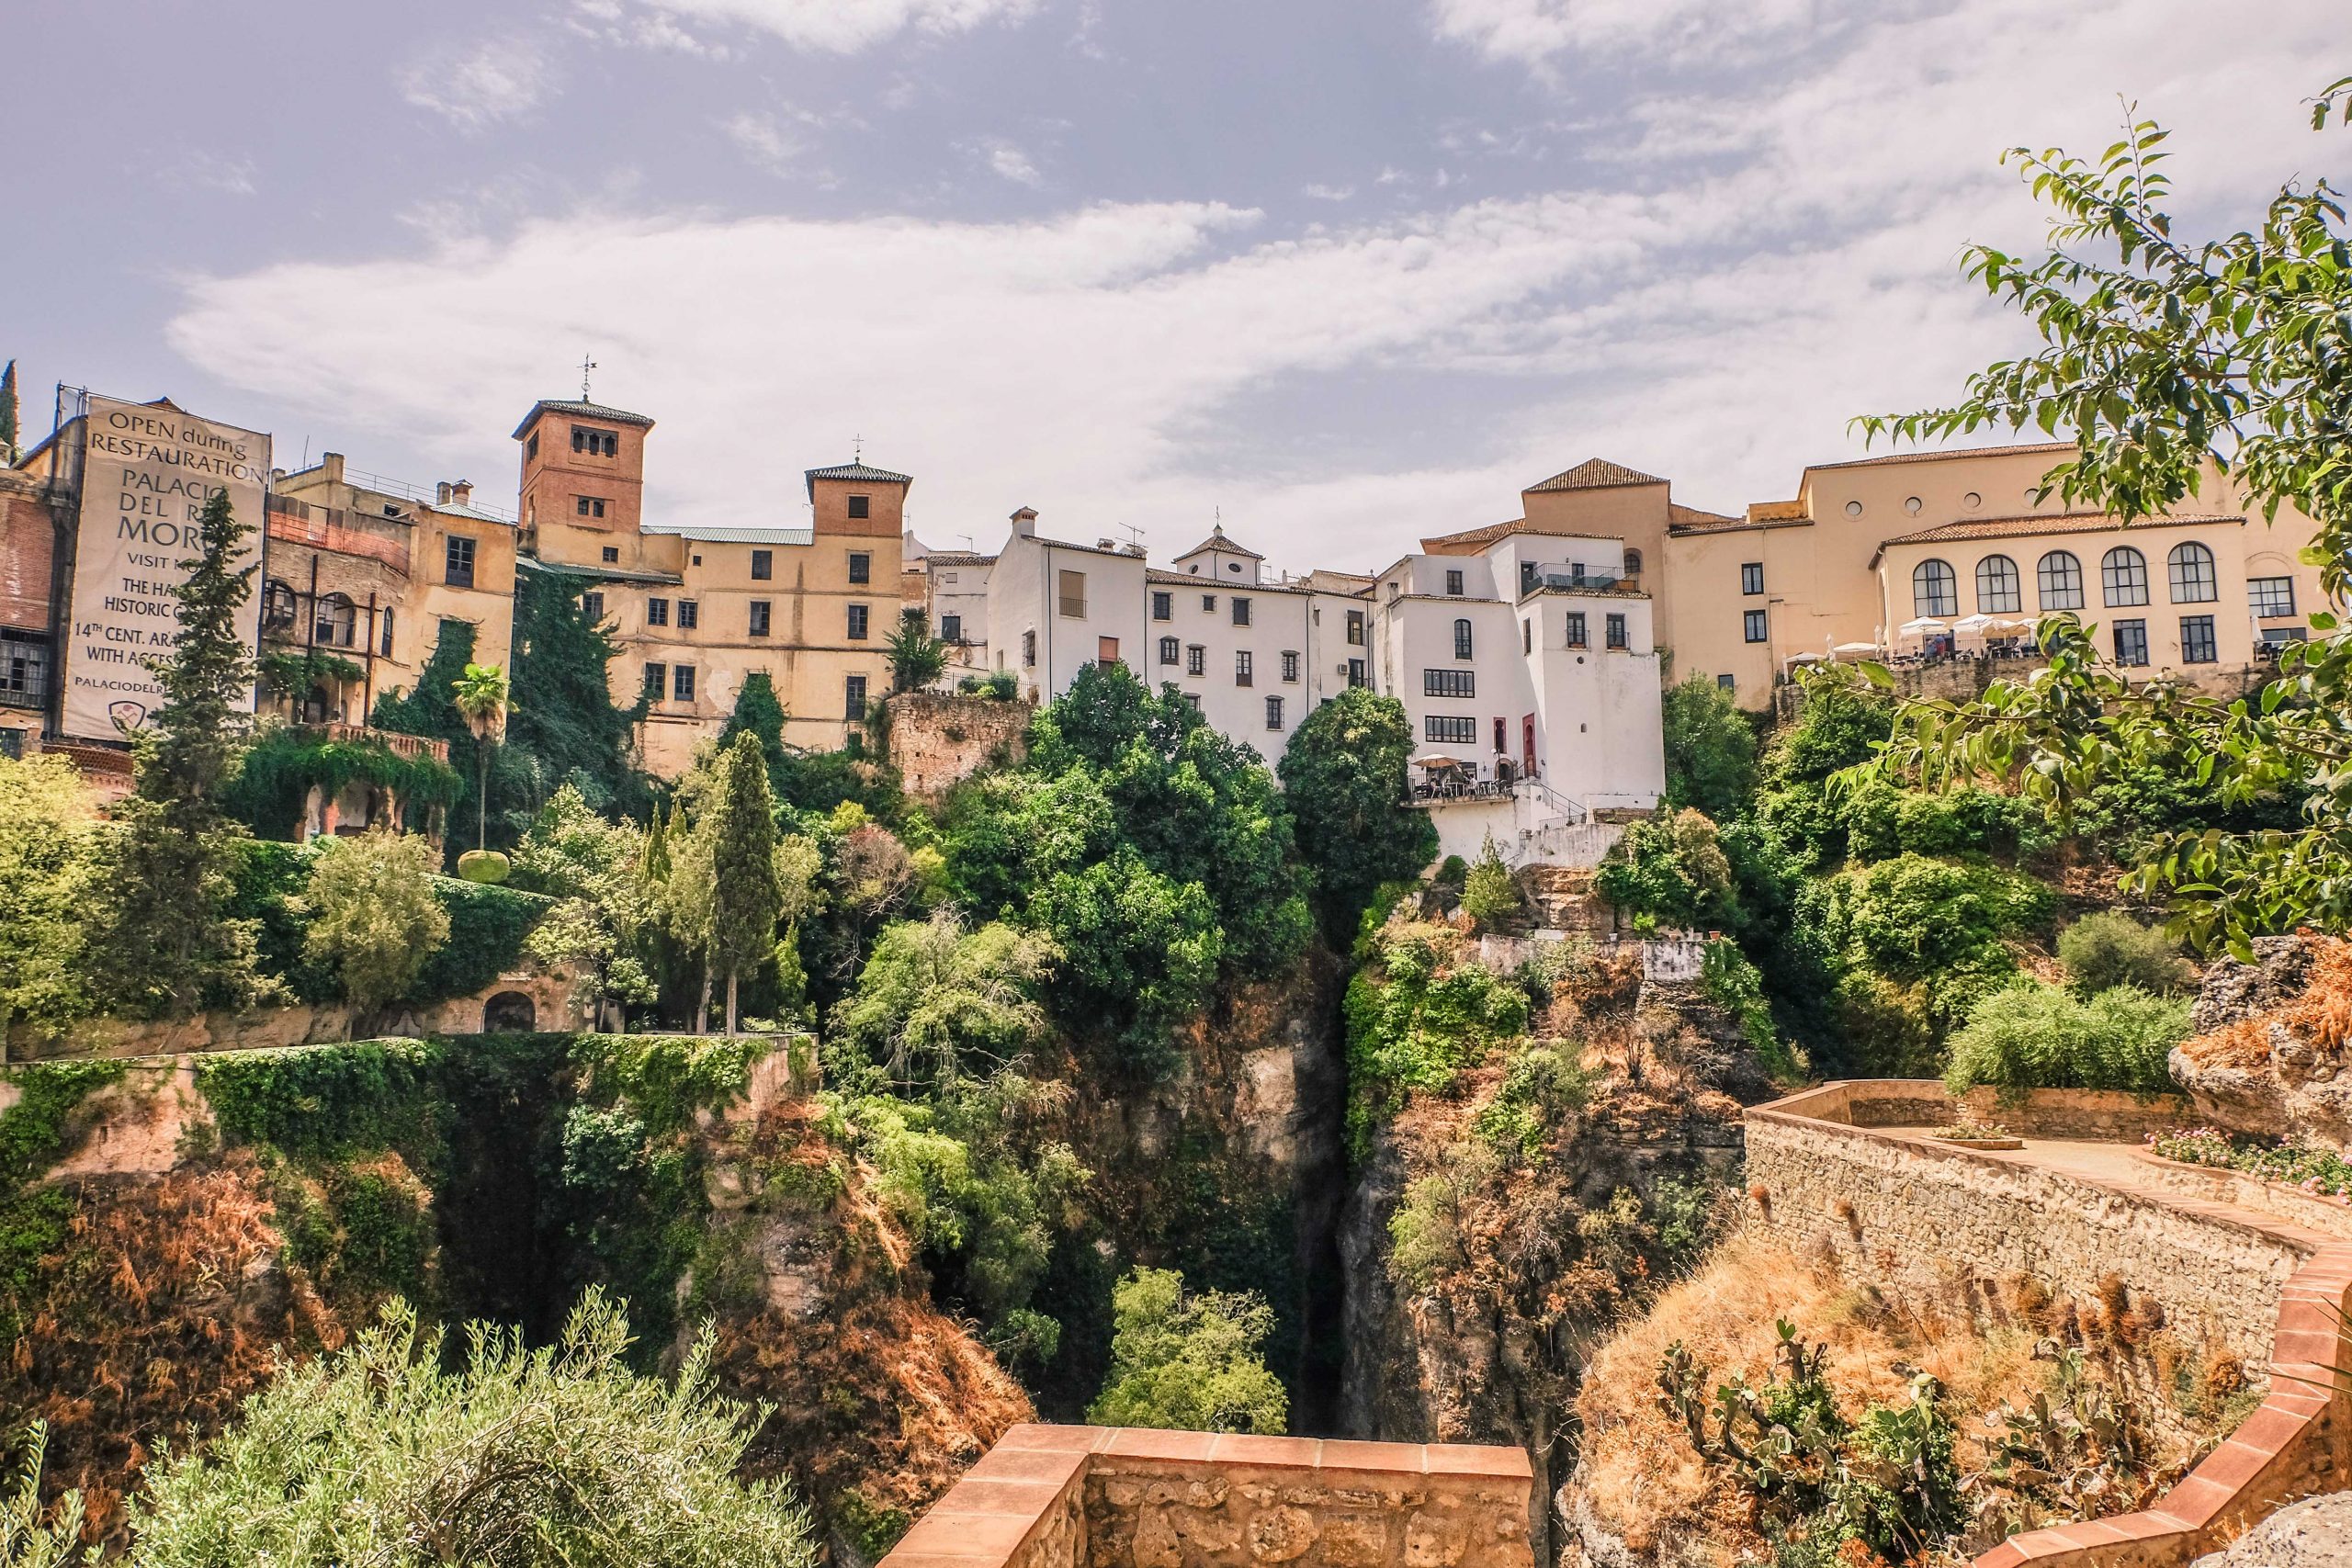 The gorgeous town of Ronda with its specific Spanish buildings located on steep slopes